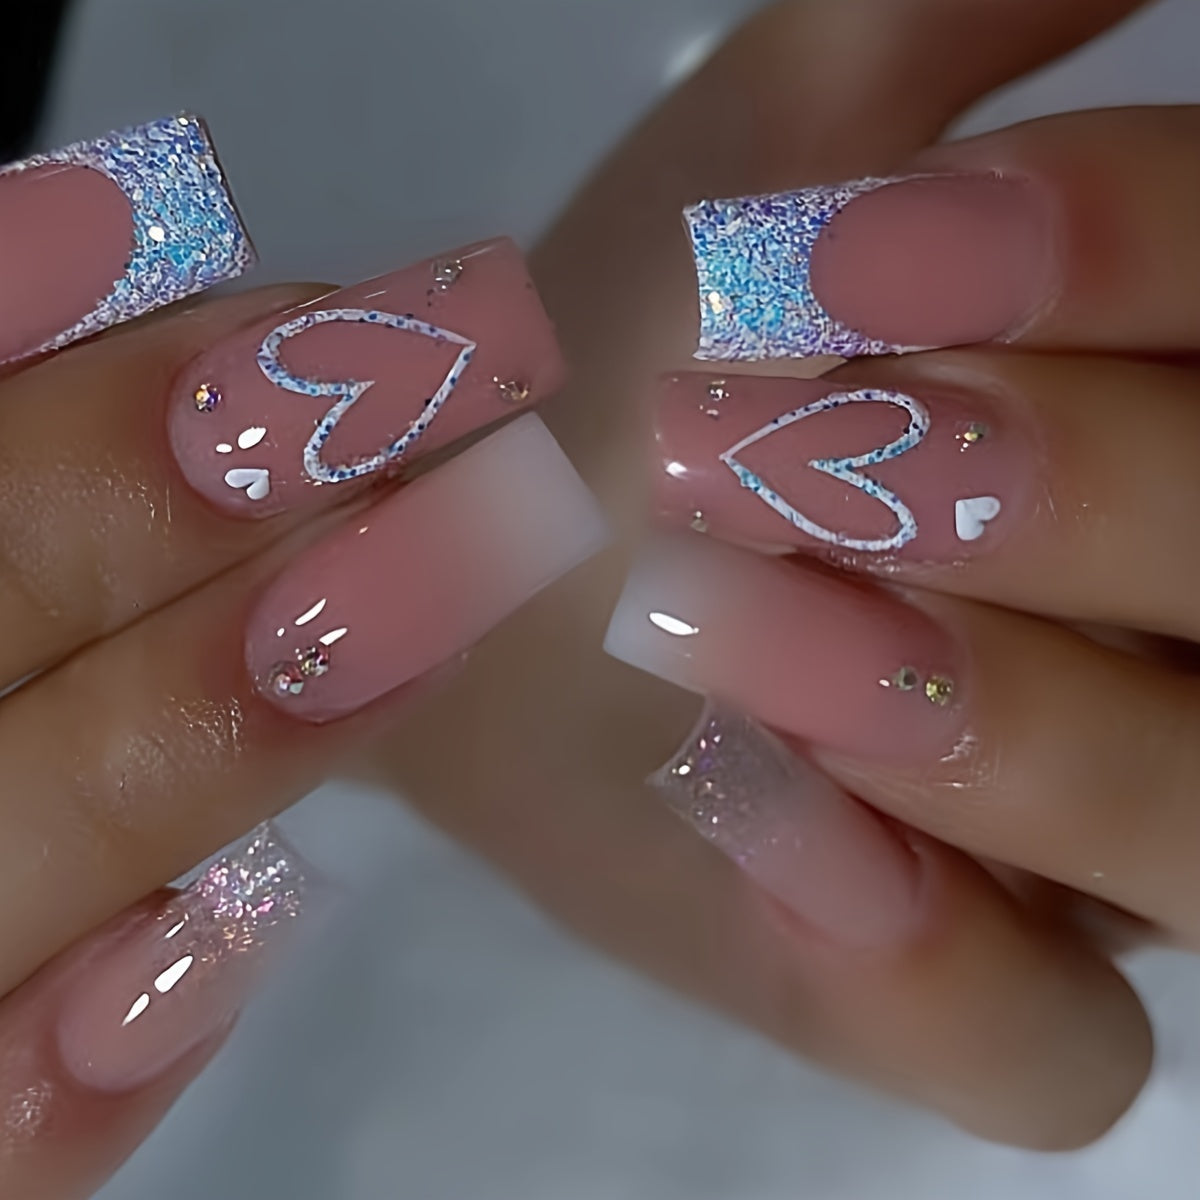 24pcs Glossy Pinkish White Gradient Press On Nails with Glitter Heart Design, Medium Square Fake Nails for Women Girls